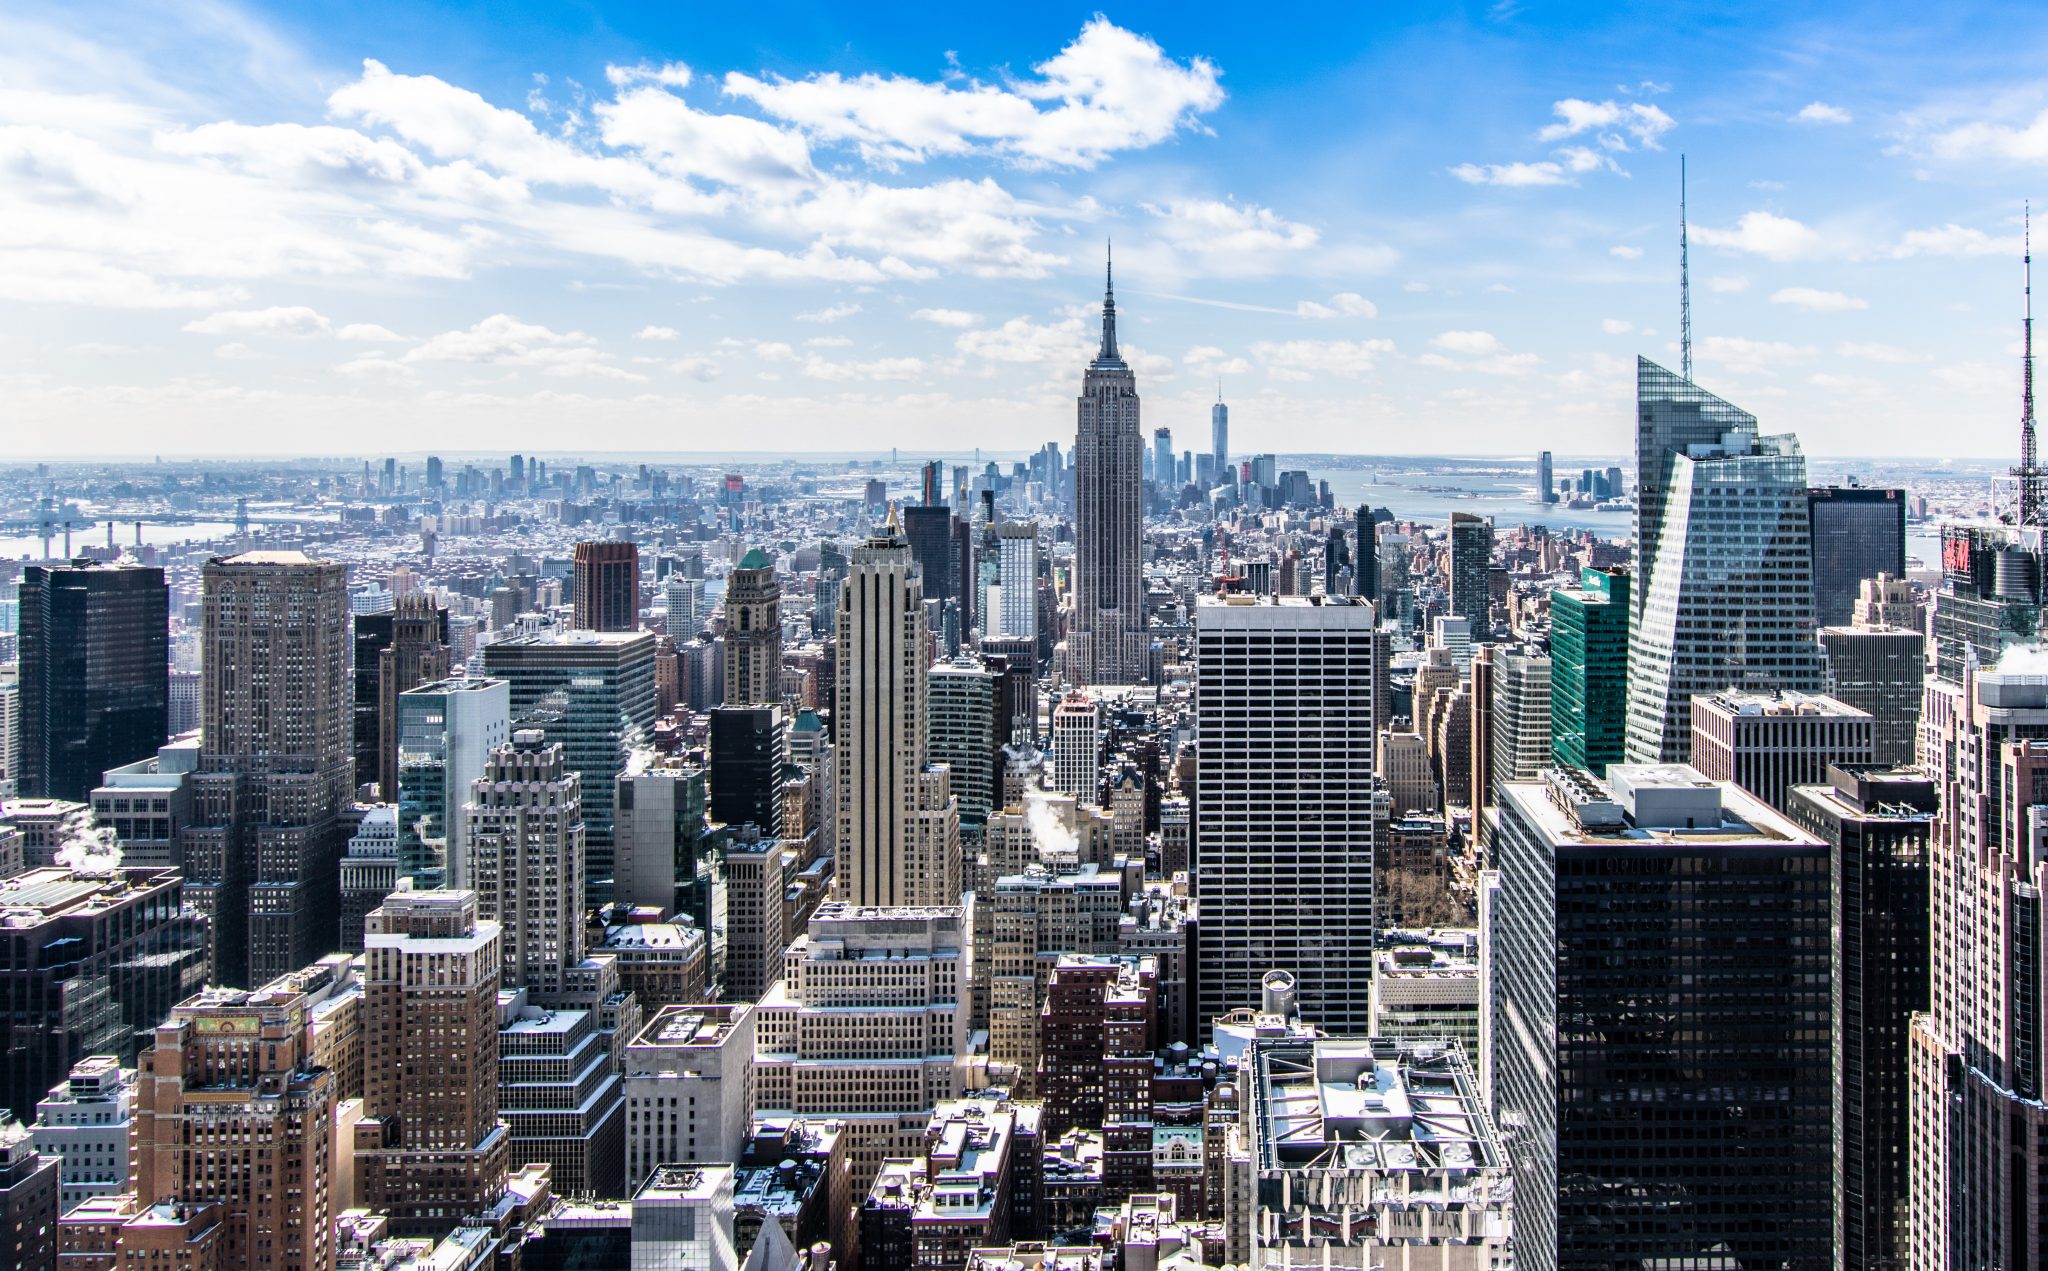 New York City in daytime viewed from a high elevation such as a drone or skyscraper